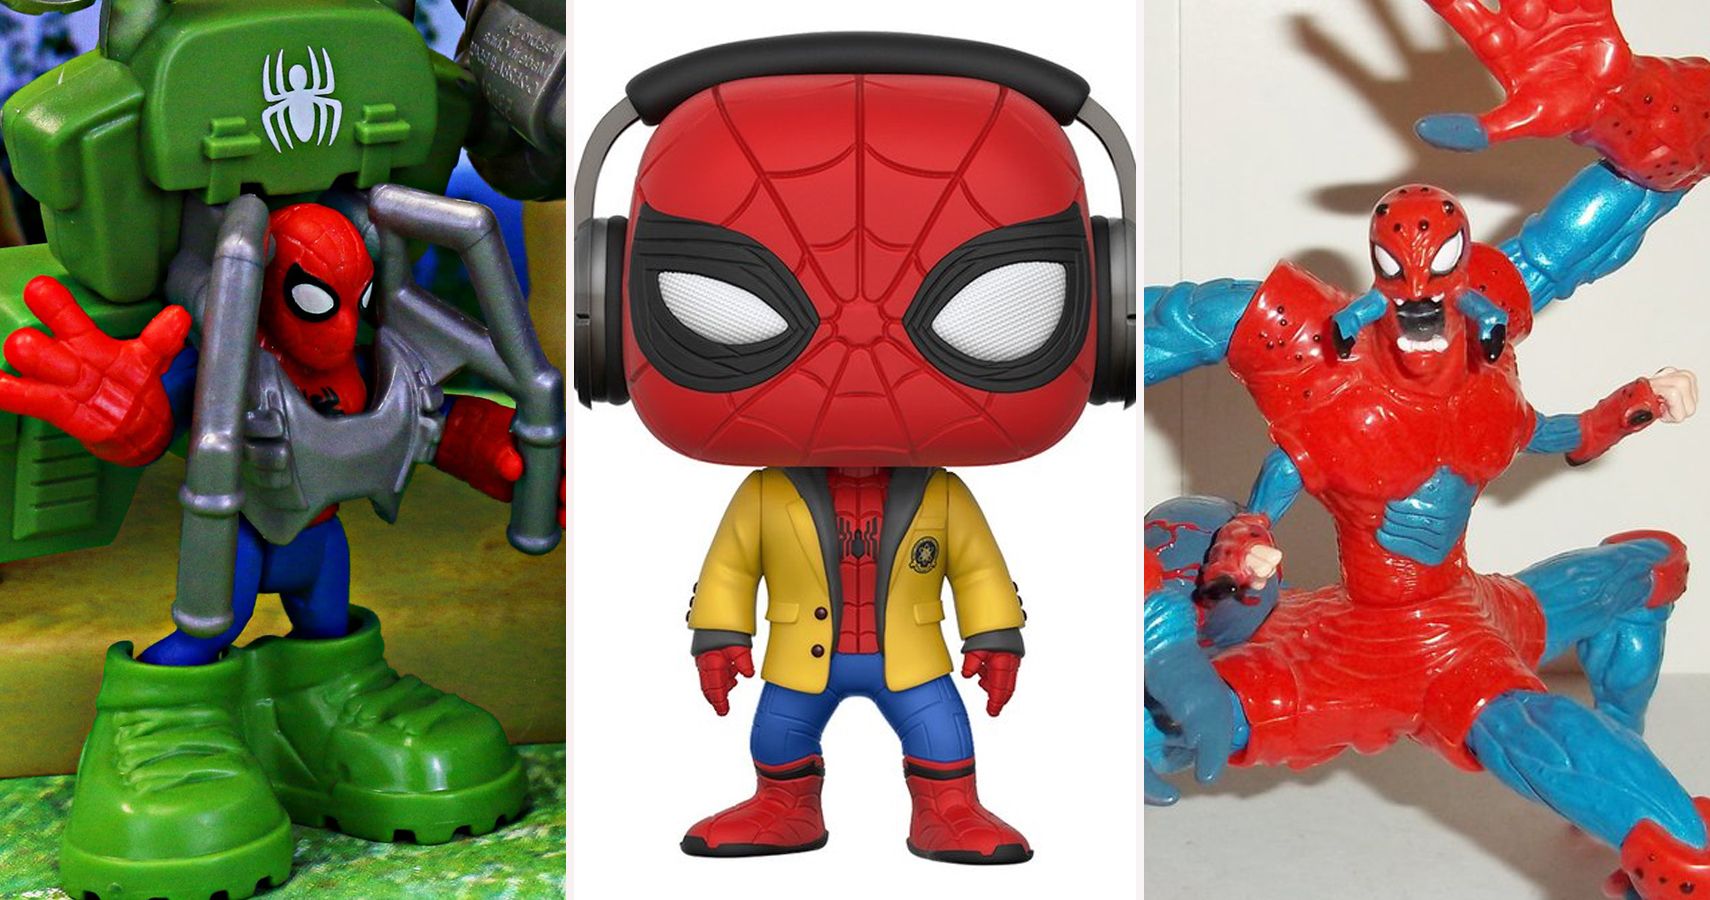 Marvel: The 10 Lamest Spider-Man Toys Ever (And The 10 Best)